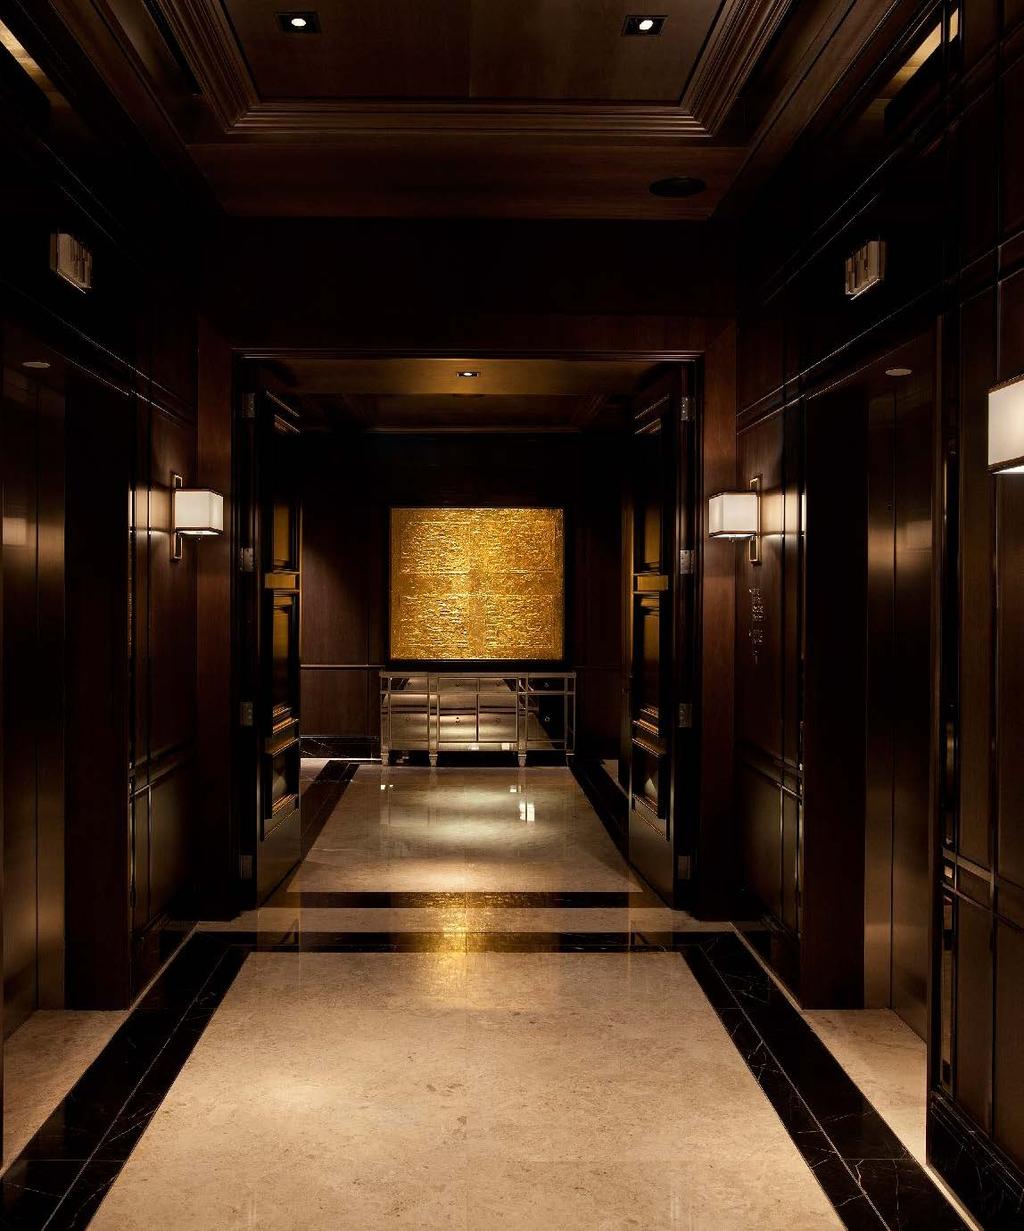 A NEW LEVEL OF PRIVATE DINING Grand Hyatt Macau takes exclusive private dining to a whole new level the 37th floor to be exact.